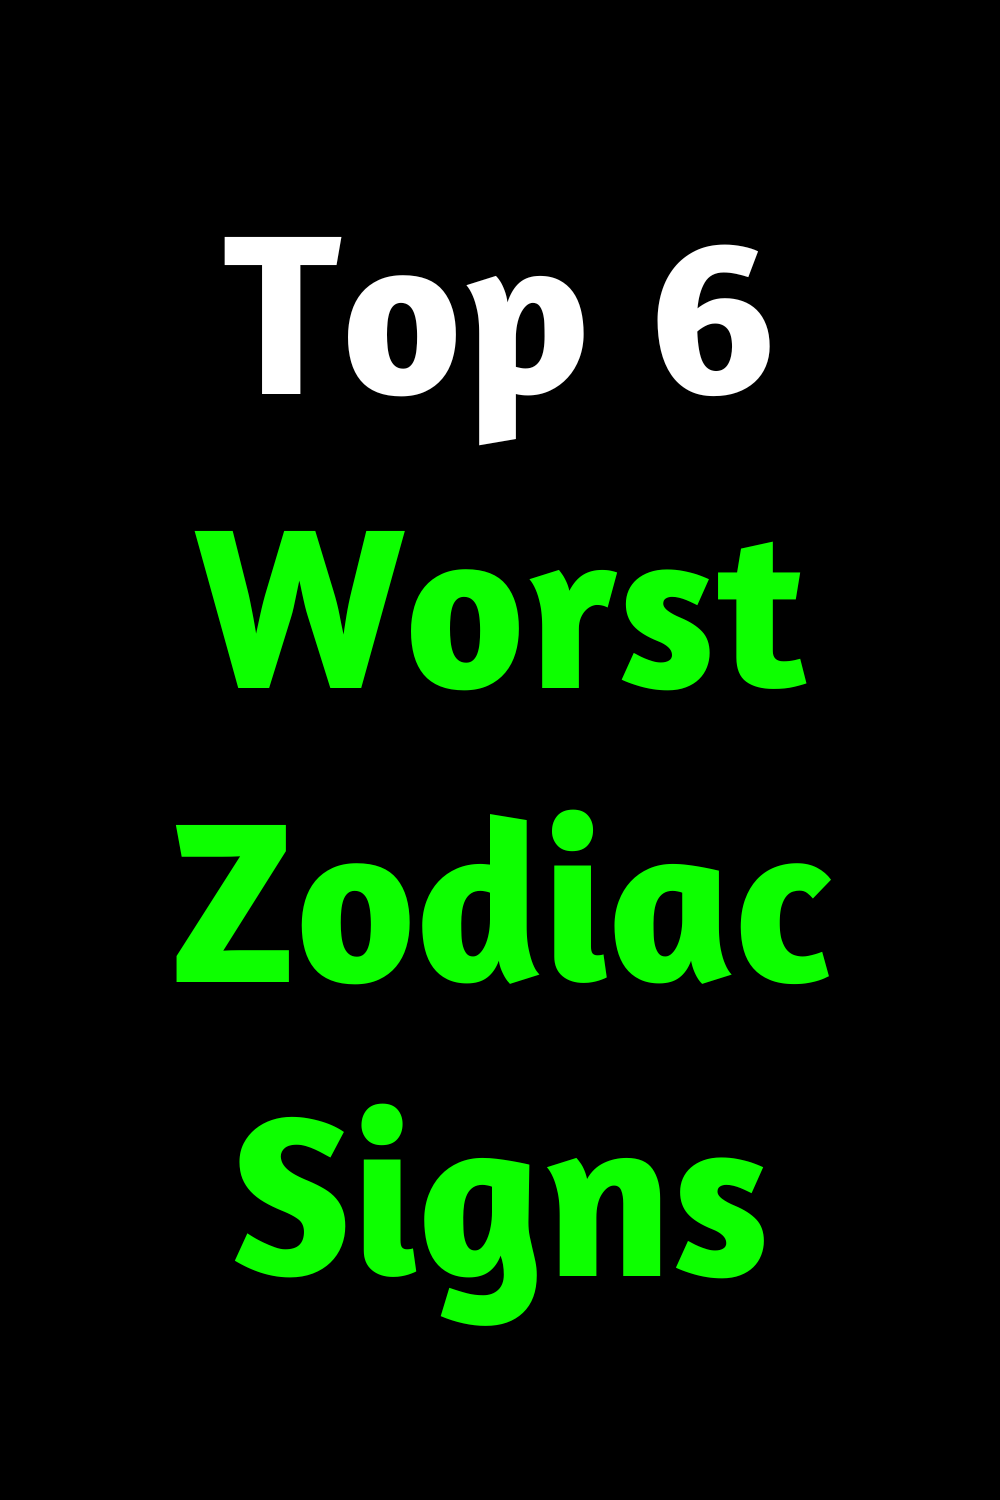 Top 6 Worst Zodiac Signs